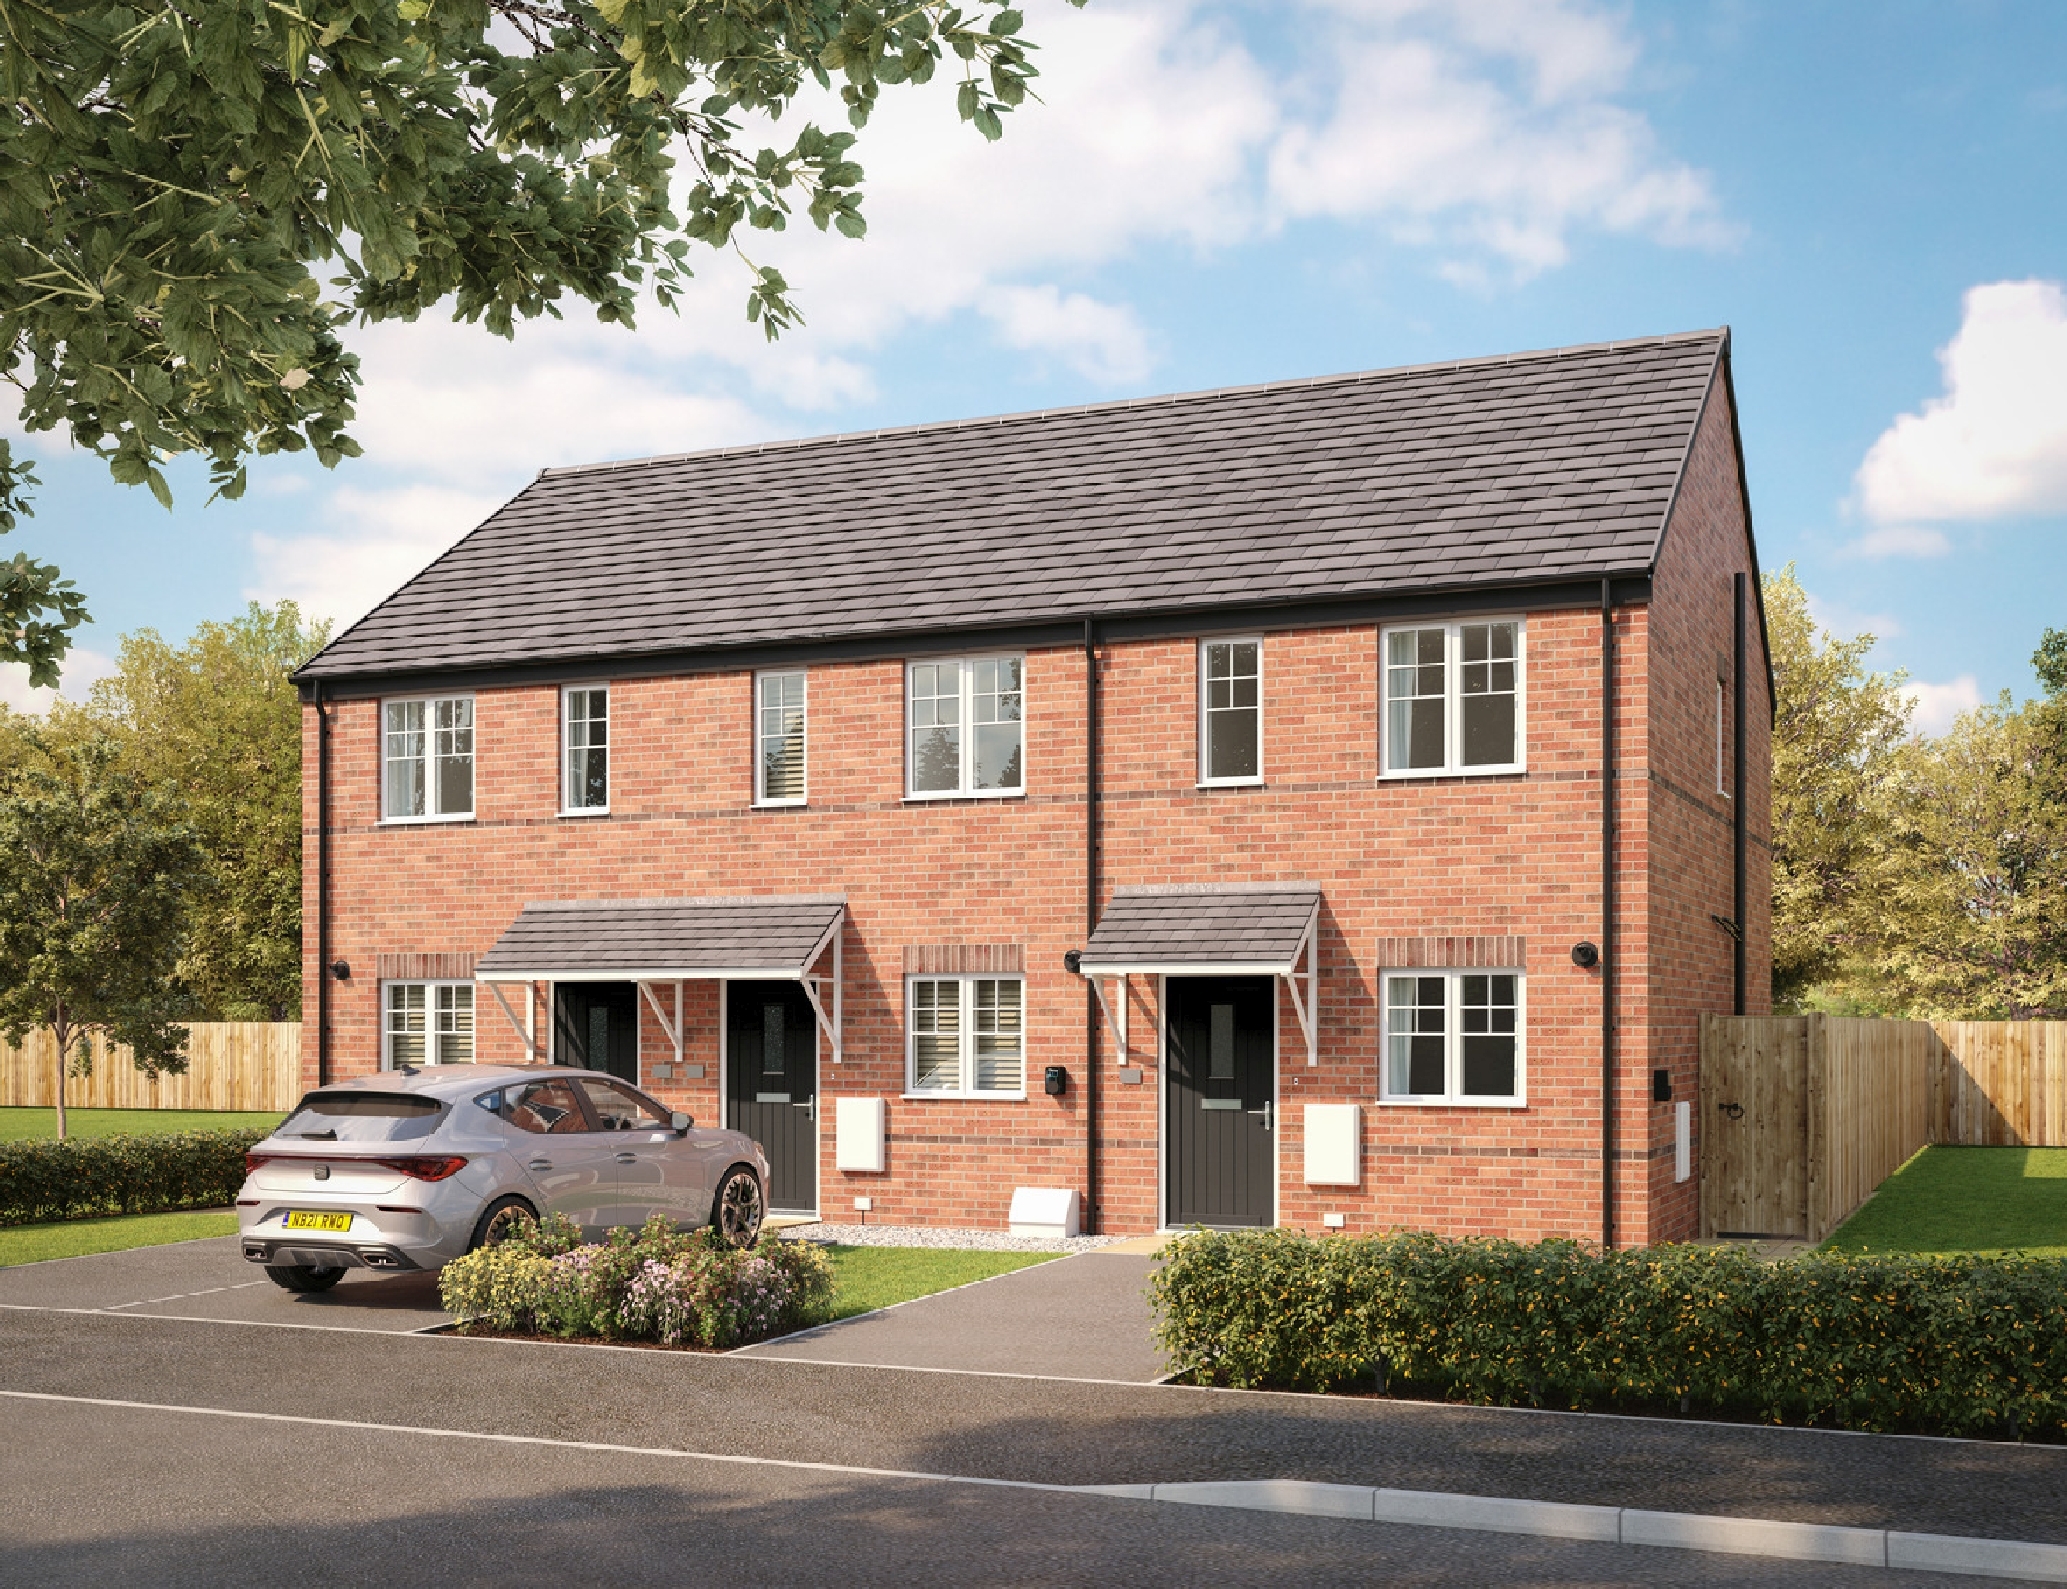 Builder unveils ‘affordable homes’ with North East Derbyshire District Council scheme as some fear rising number of developments